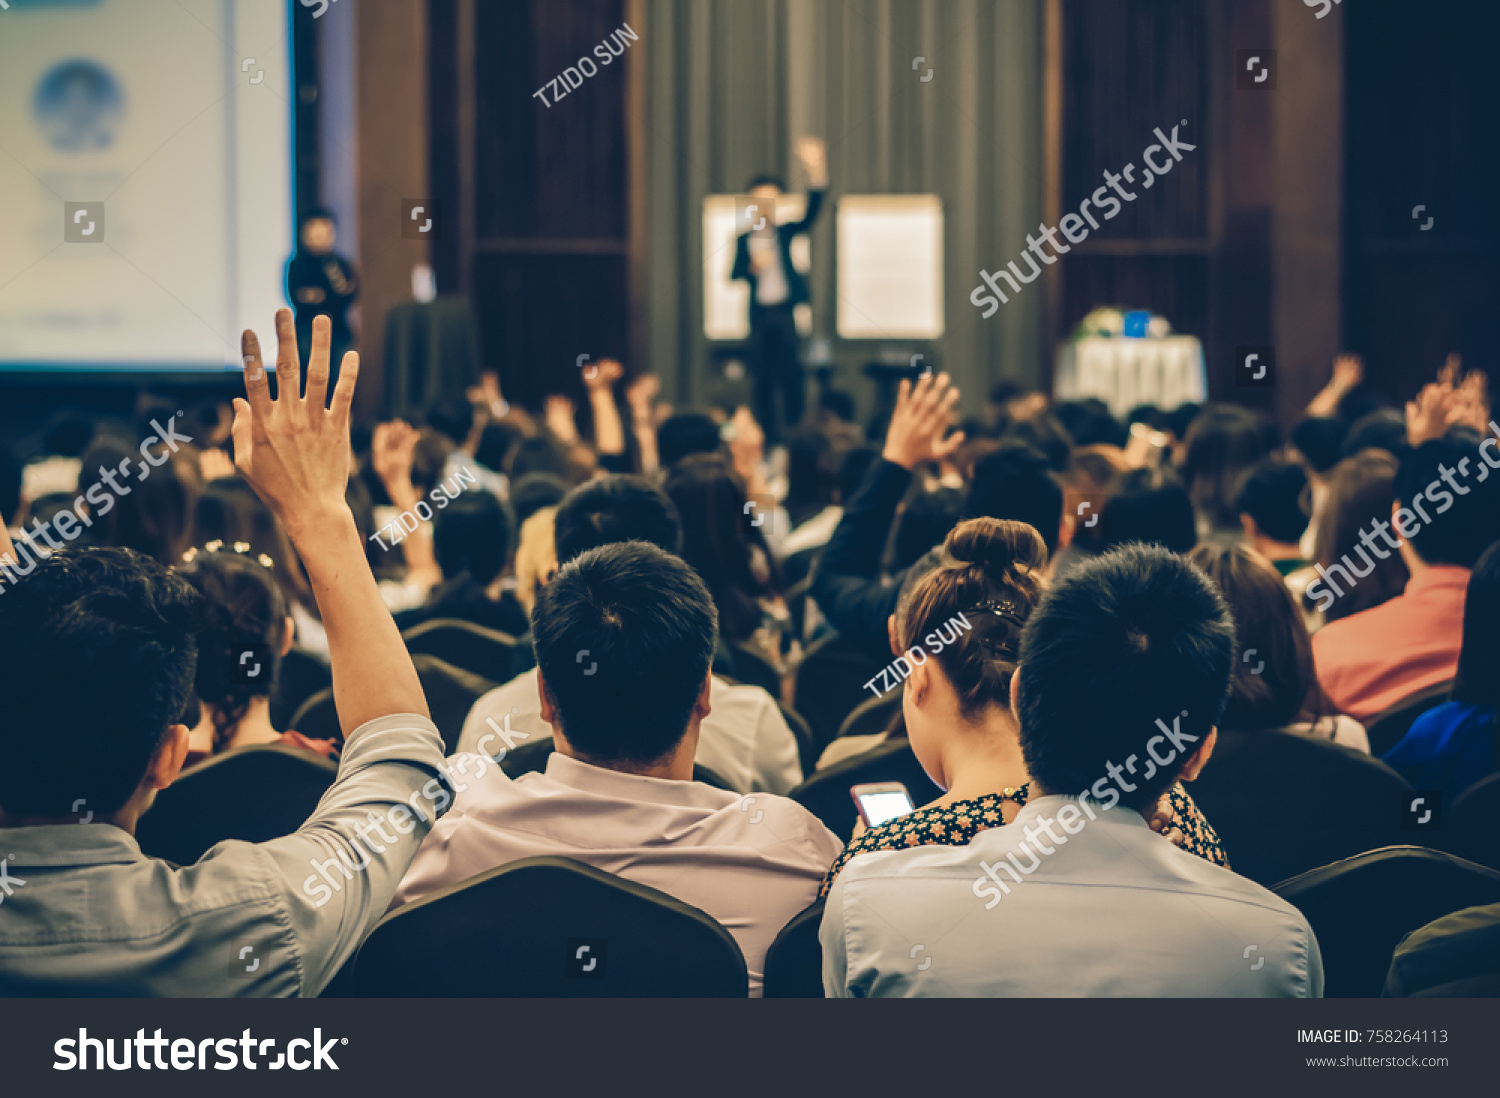 Speaker on the stage with Rear view of Audience in the conference hall or seminar meeting, business and education concept #758264113